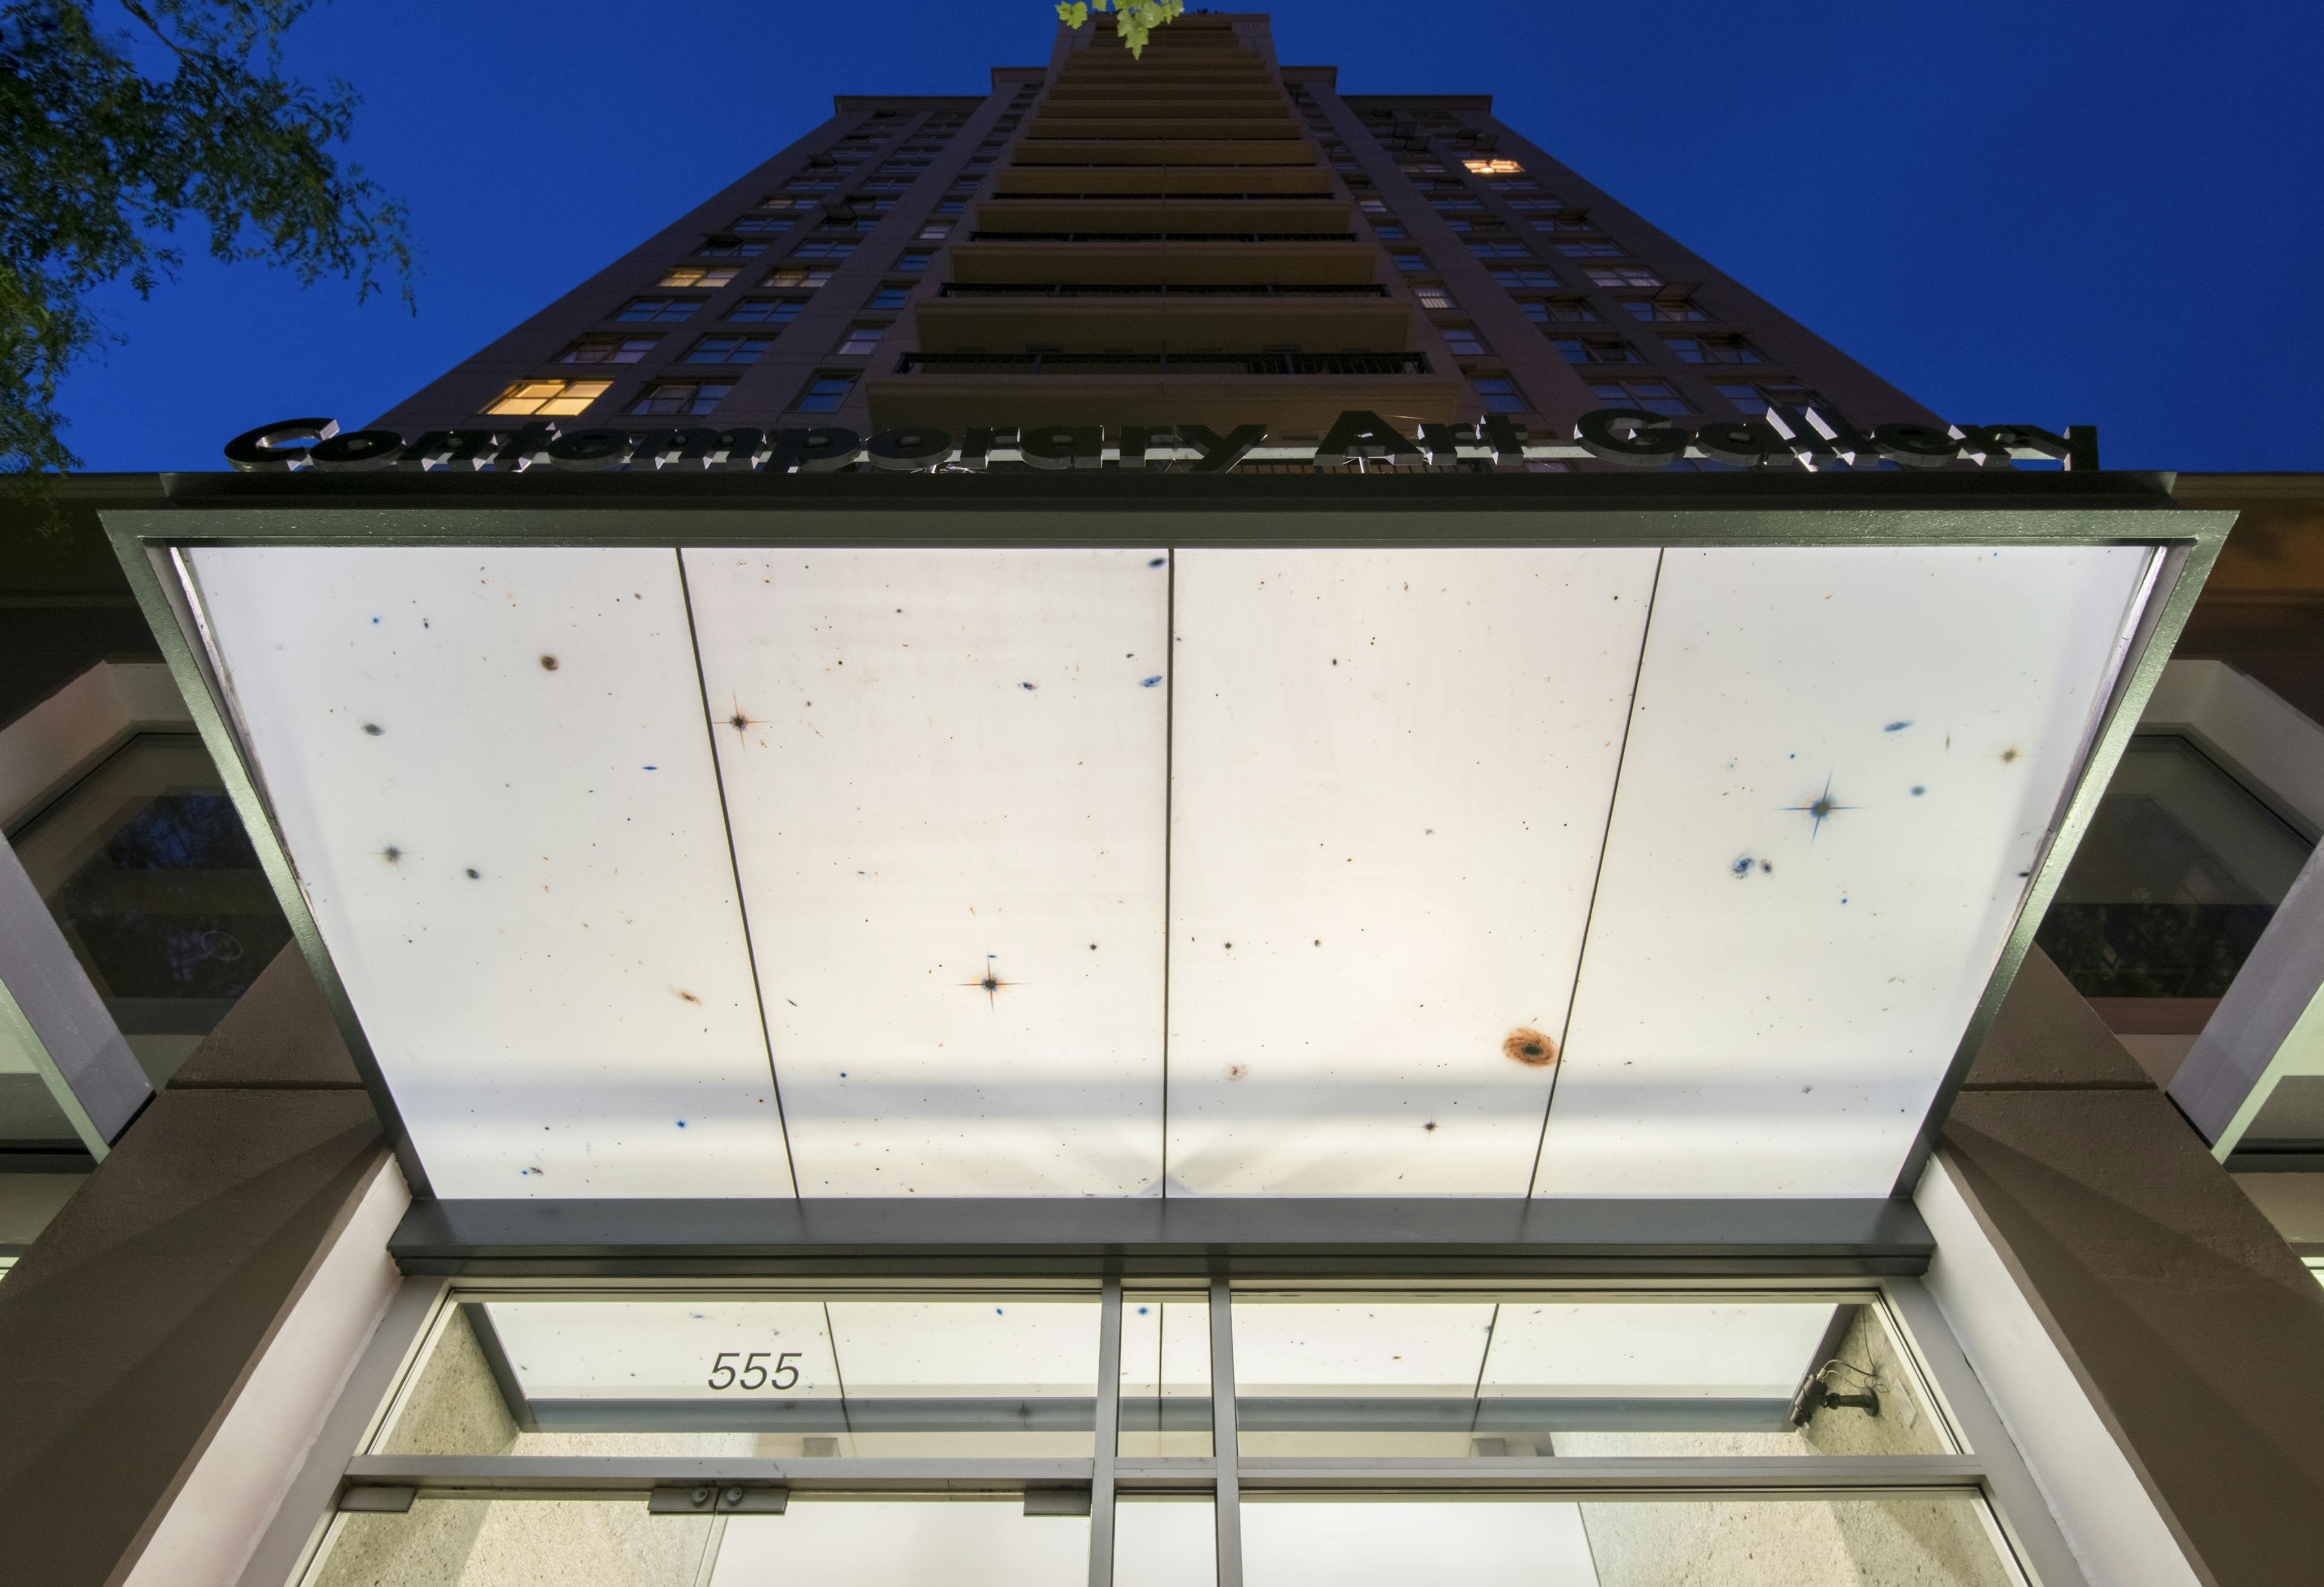 In the glass overhang above CAG’s entrance, four rectangular white panels are installed. Small stars and galaxies in blue, orange, and grey dot the panels. 